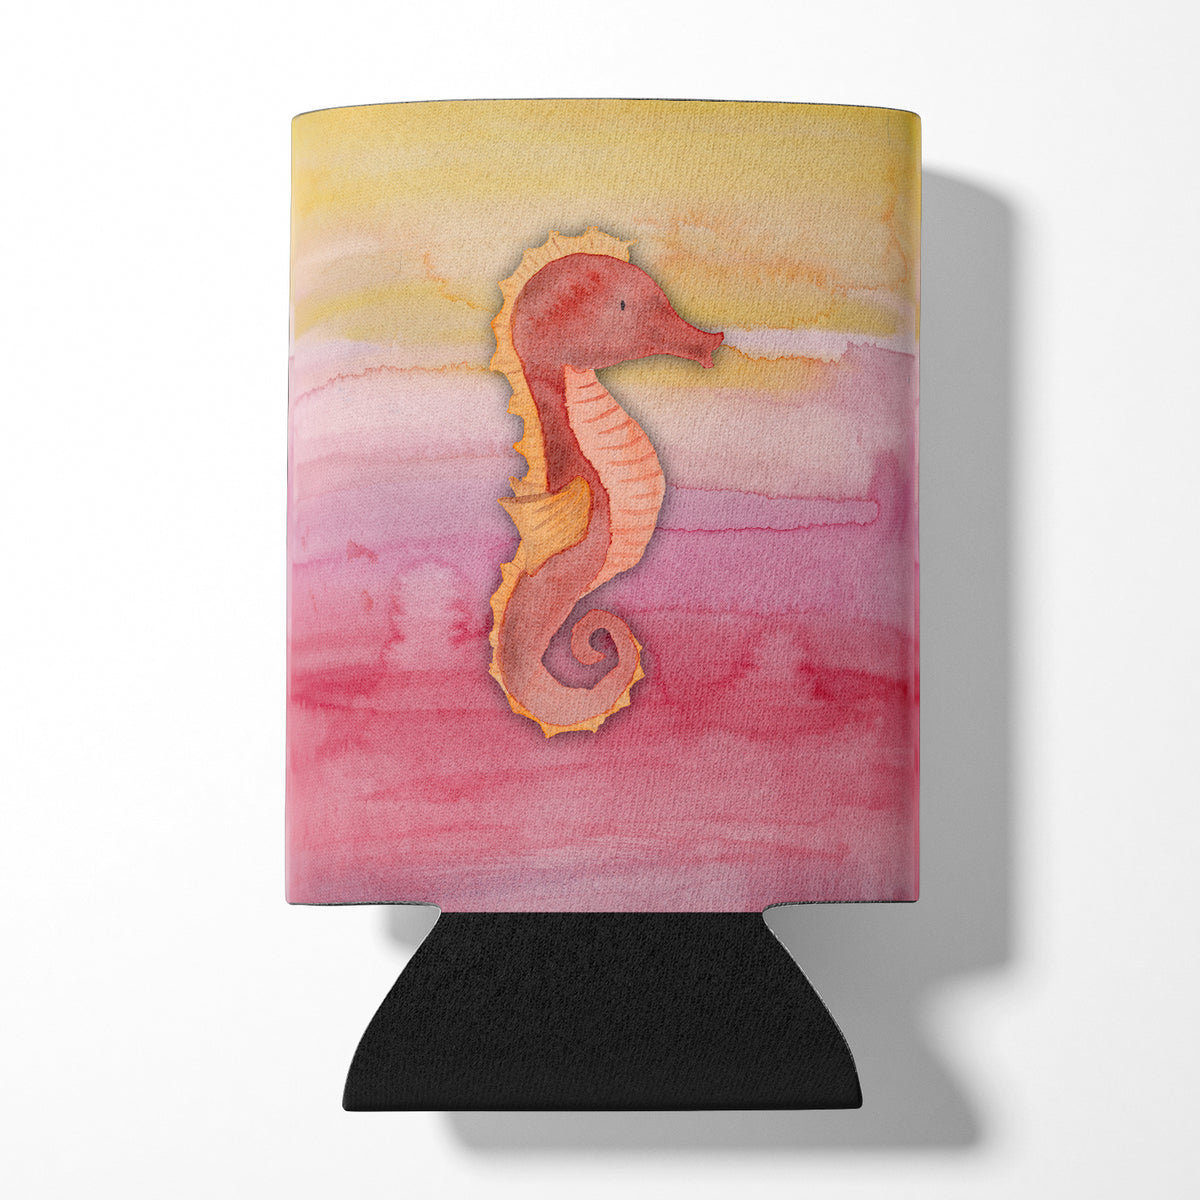 Seahorse Watercolor Can or Bottle Hugger BB7425CC